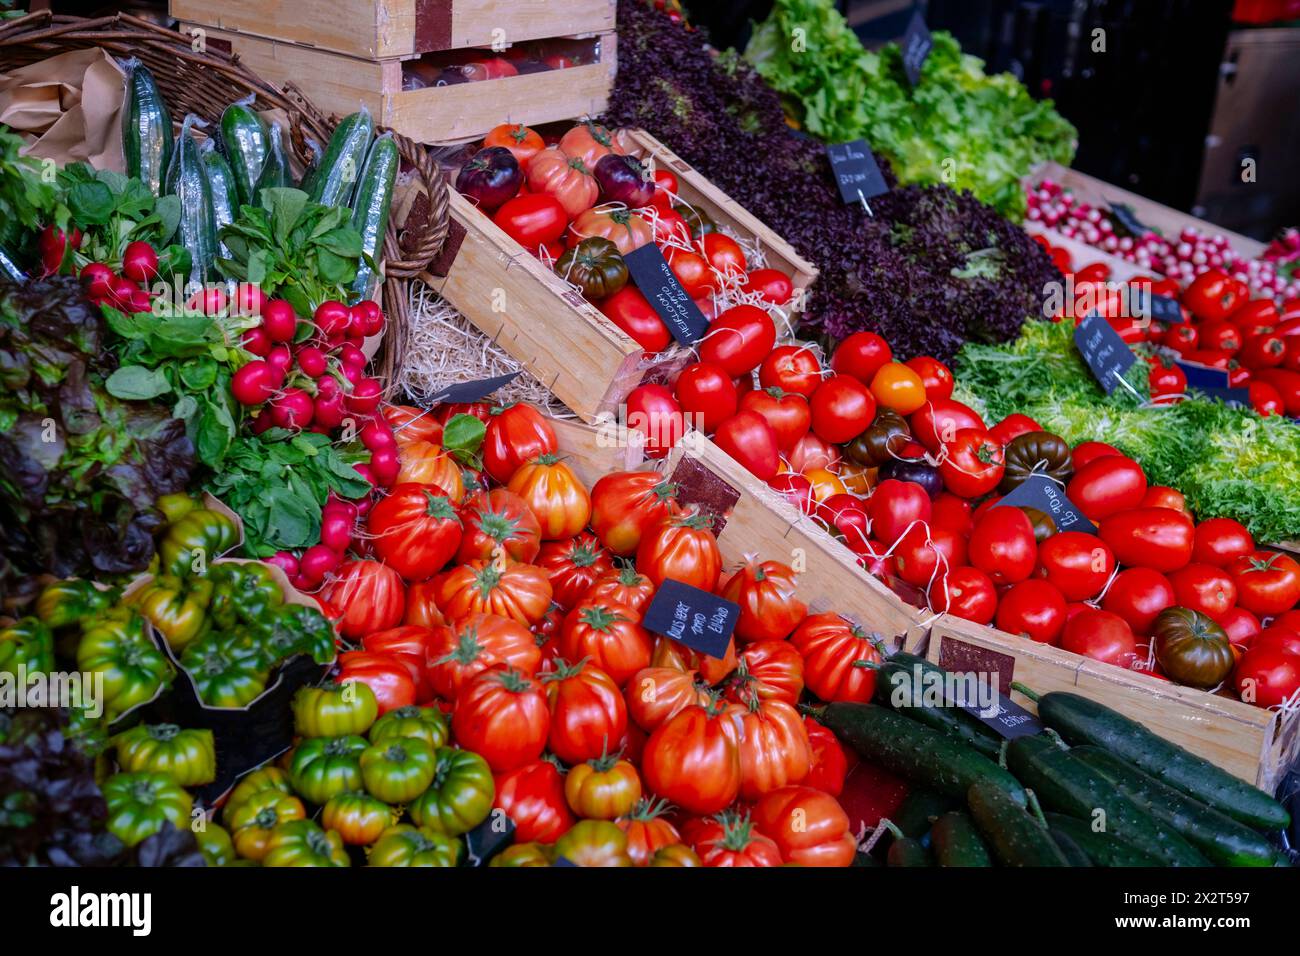 Variety of fresh red tomatoes in crates at market Stock Photo